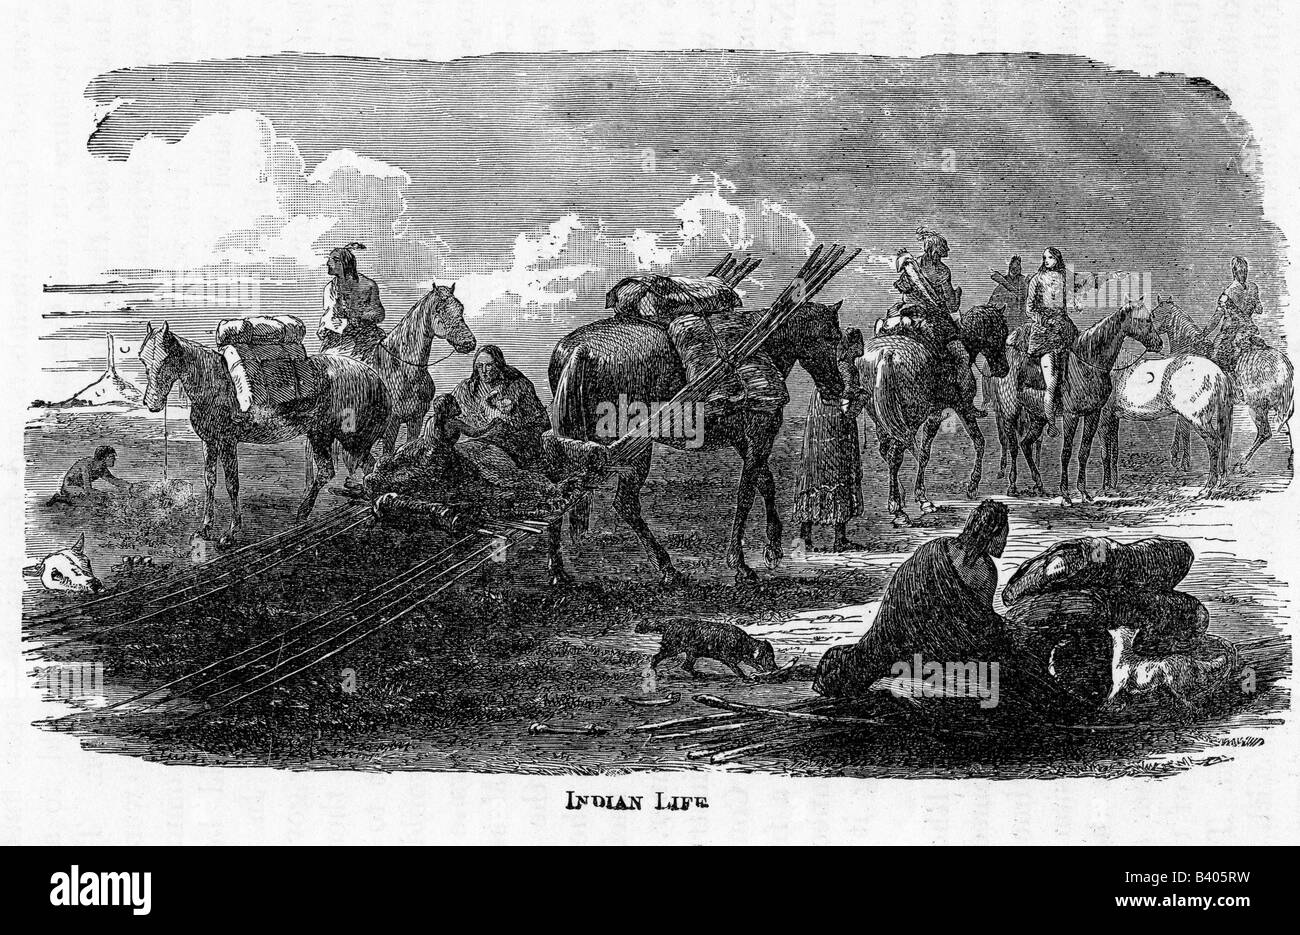 geography/travel, USA, people, Native Americans, transport, family moving, engraving, 19th century, American Indians, North America, historic, historical, Stock Photo